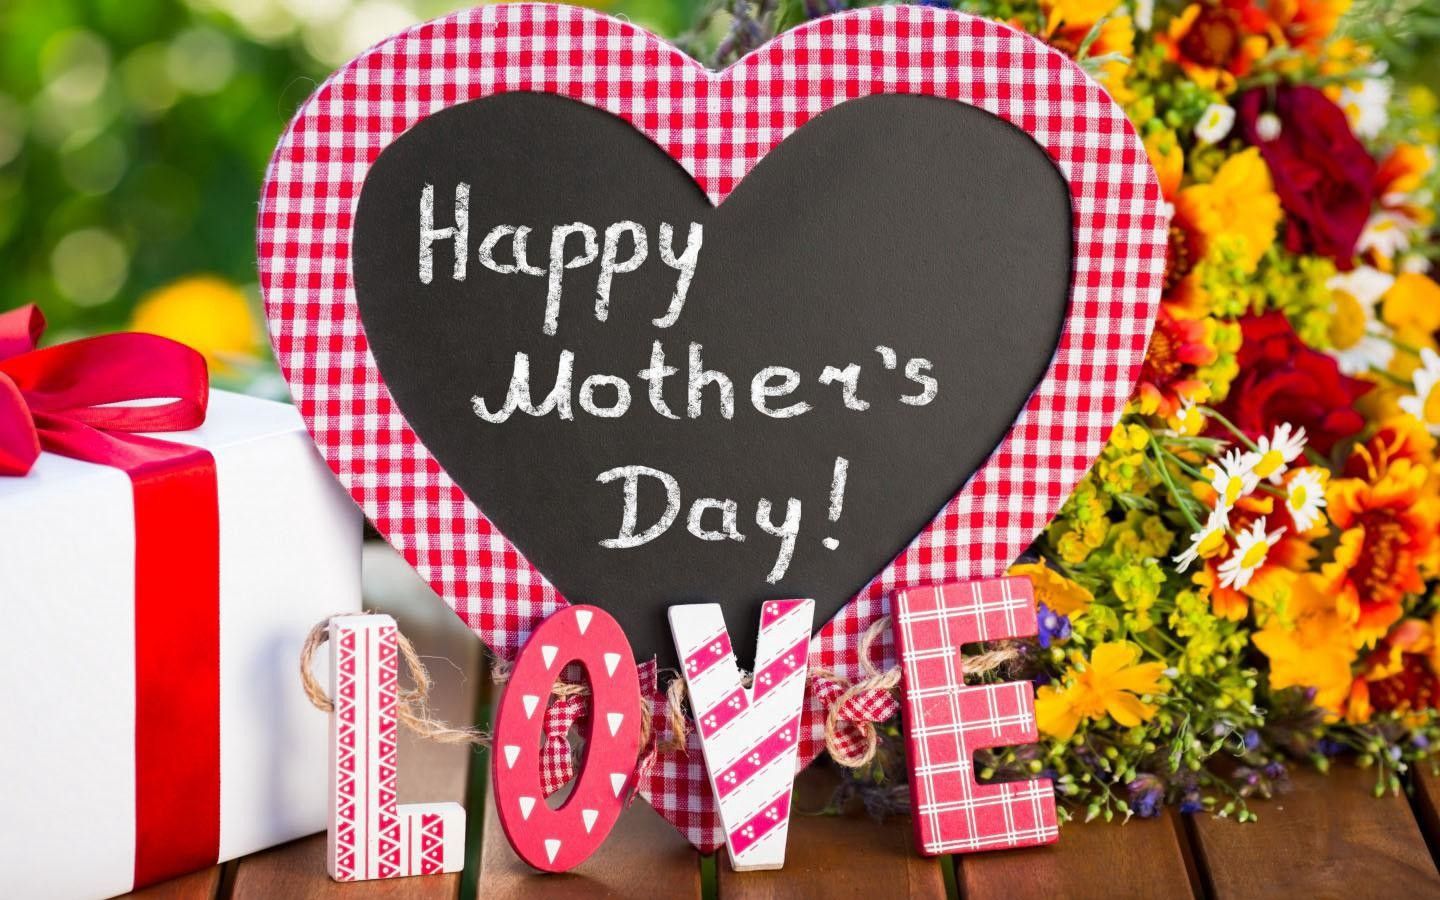 Happy Mothers Day Messages in Hindi & English with Image 2021 Mothers Day 2021 Image Photo Picture Pics Wallpaper, Mother's Day Quotes Wishes Messages Greetings